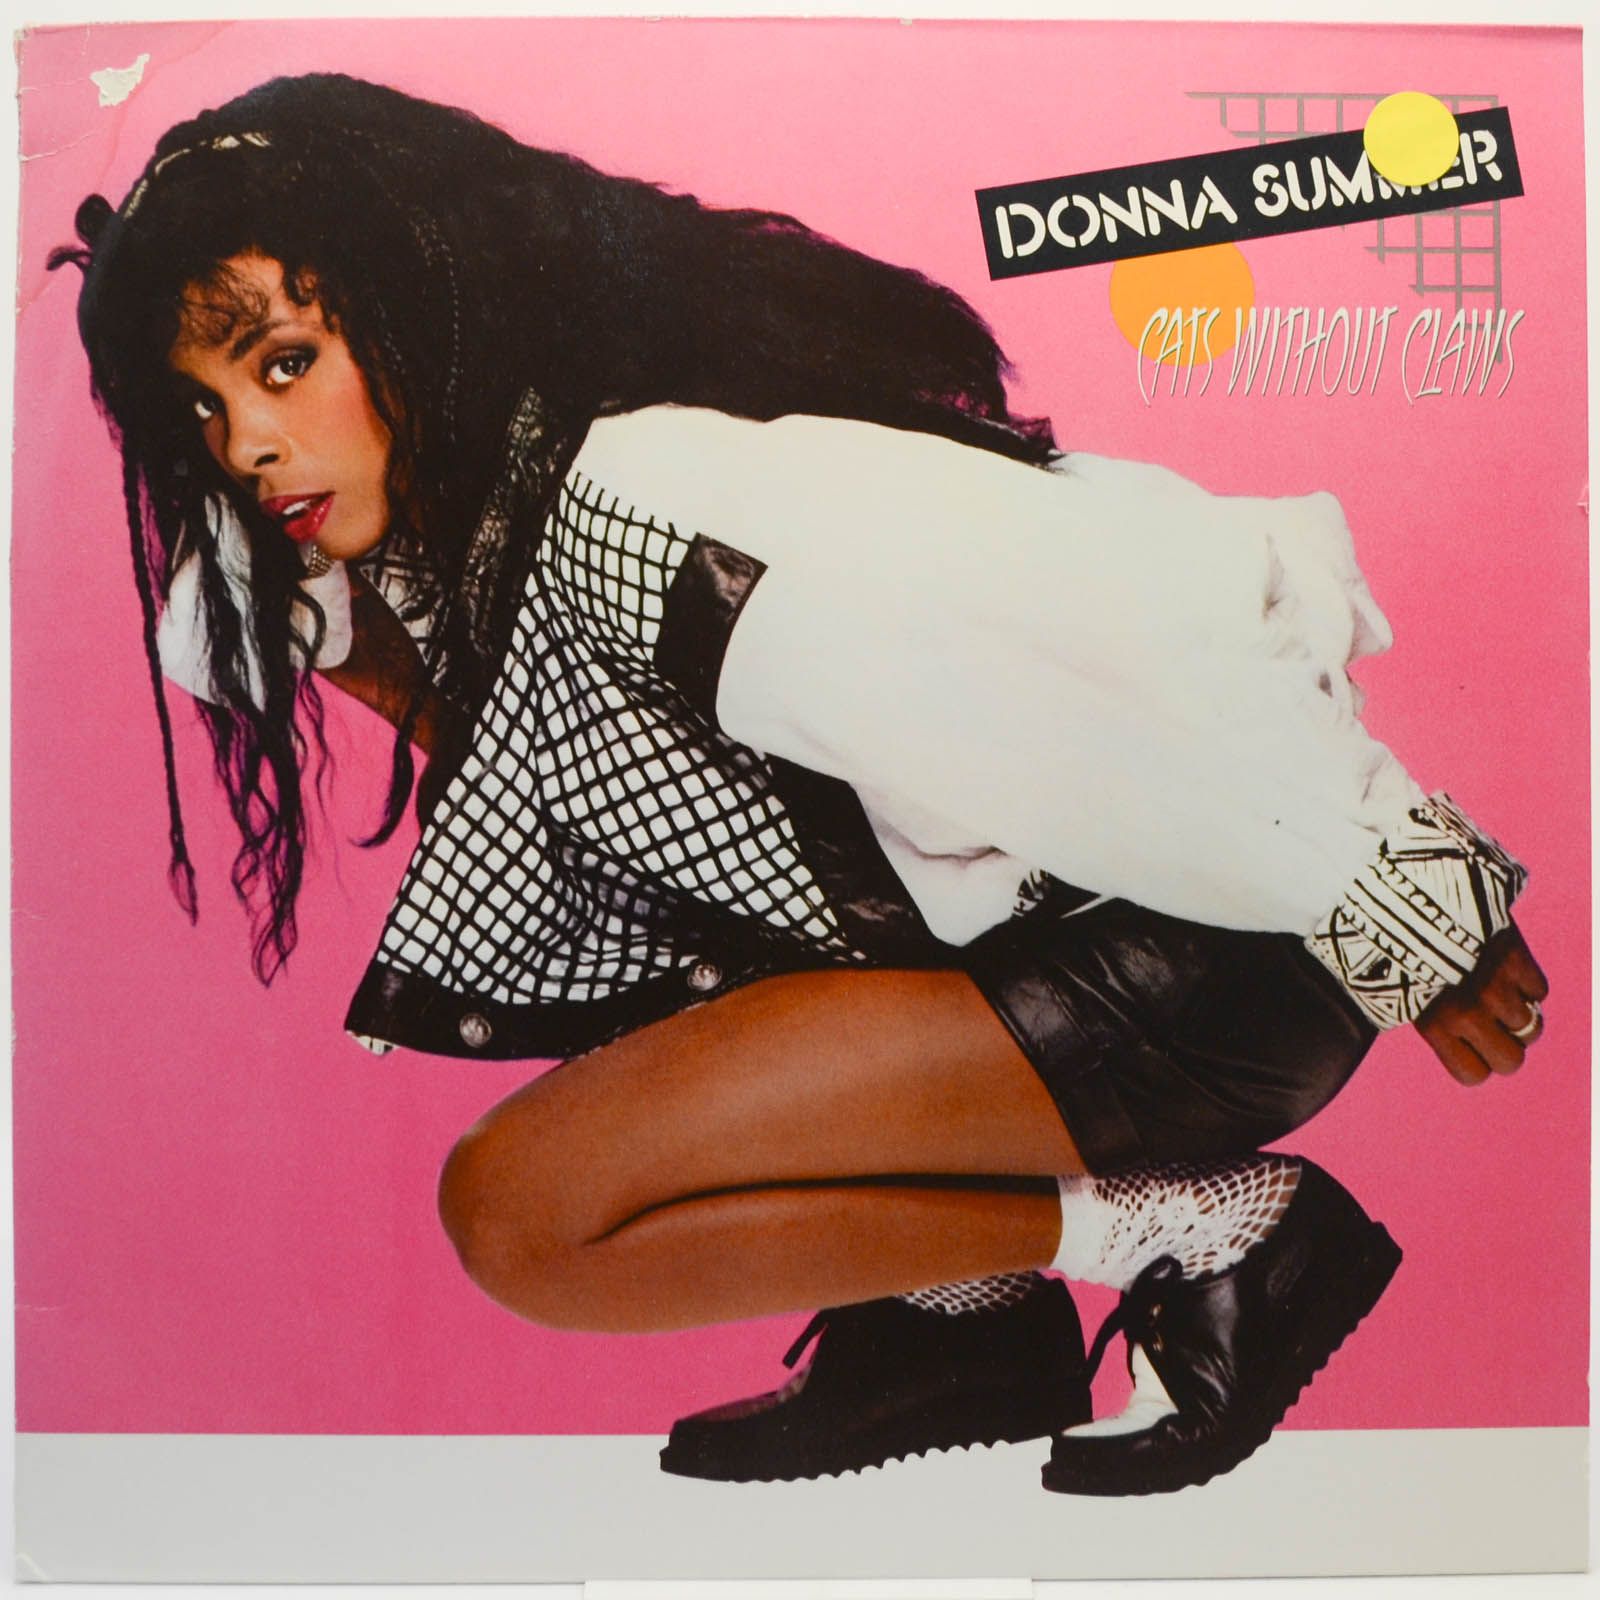 Donna Summer — Cats Without Claws, 1984